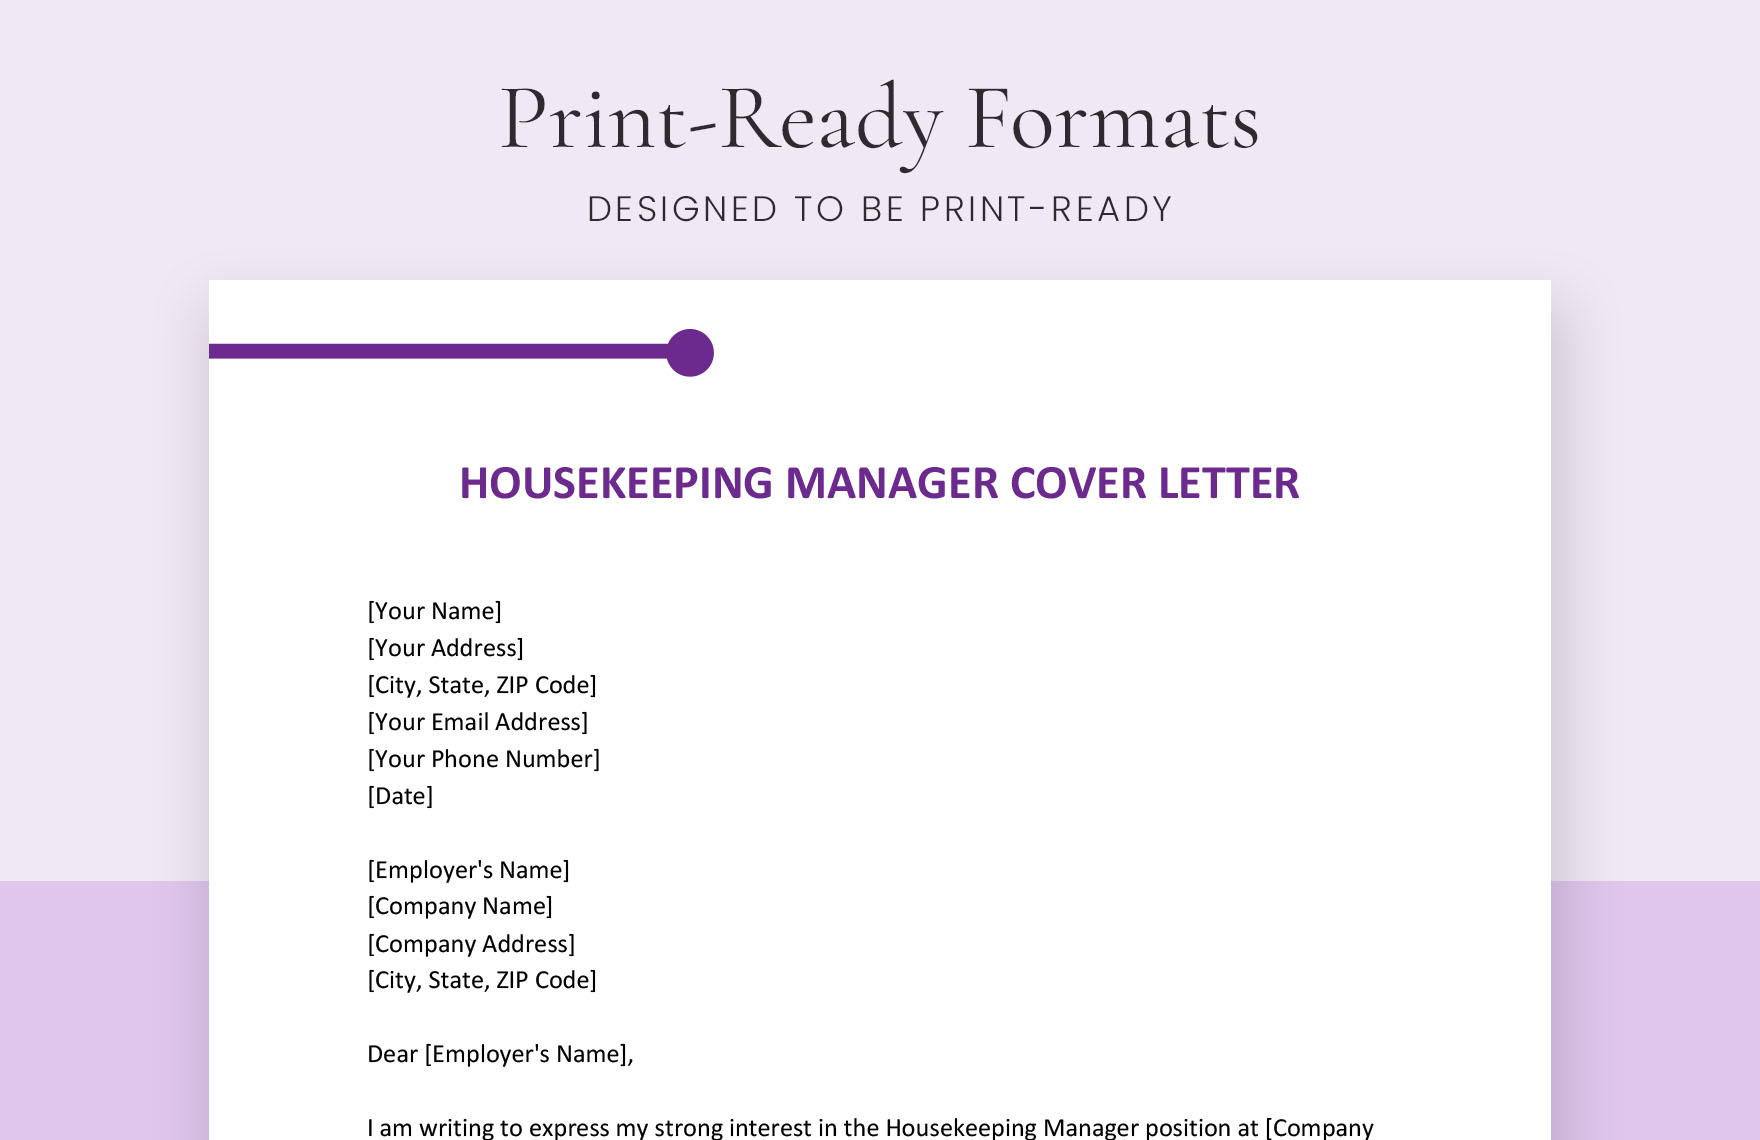 Housekeeping Manager Cover Letter